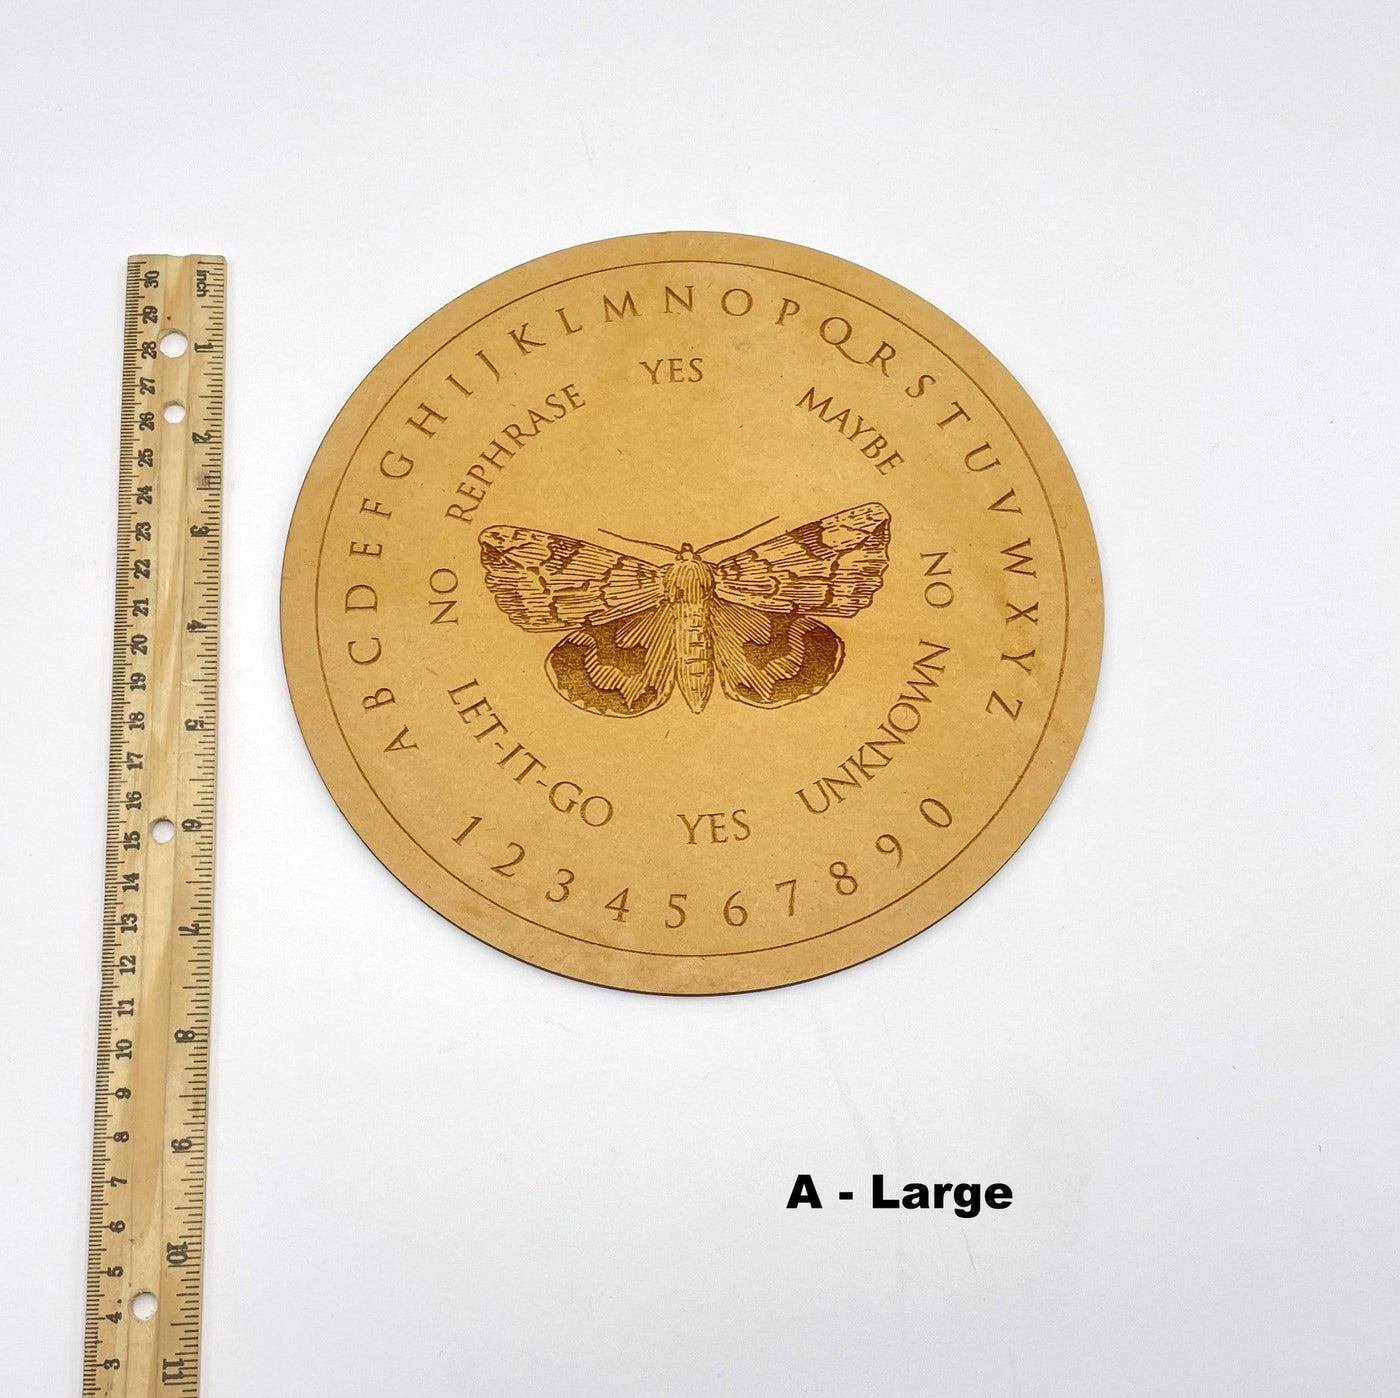 moth board next to a ruler